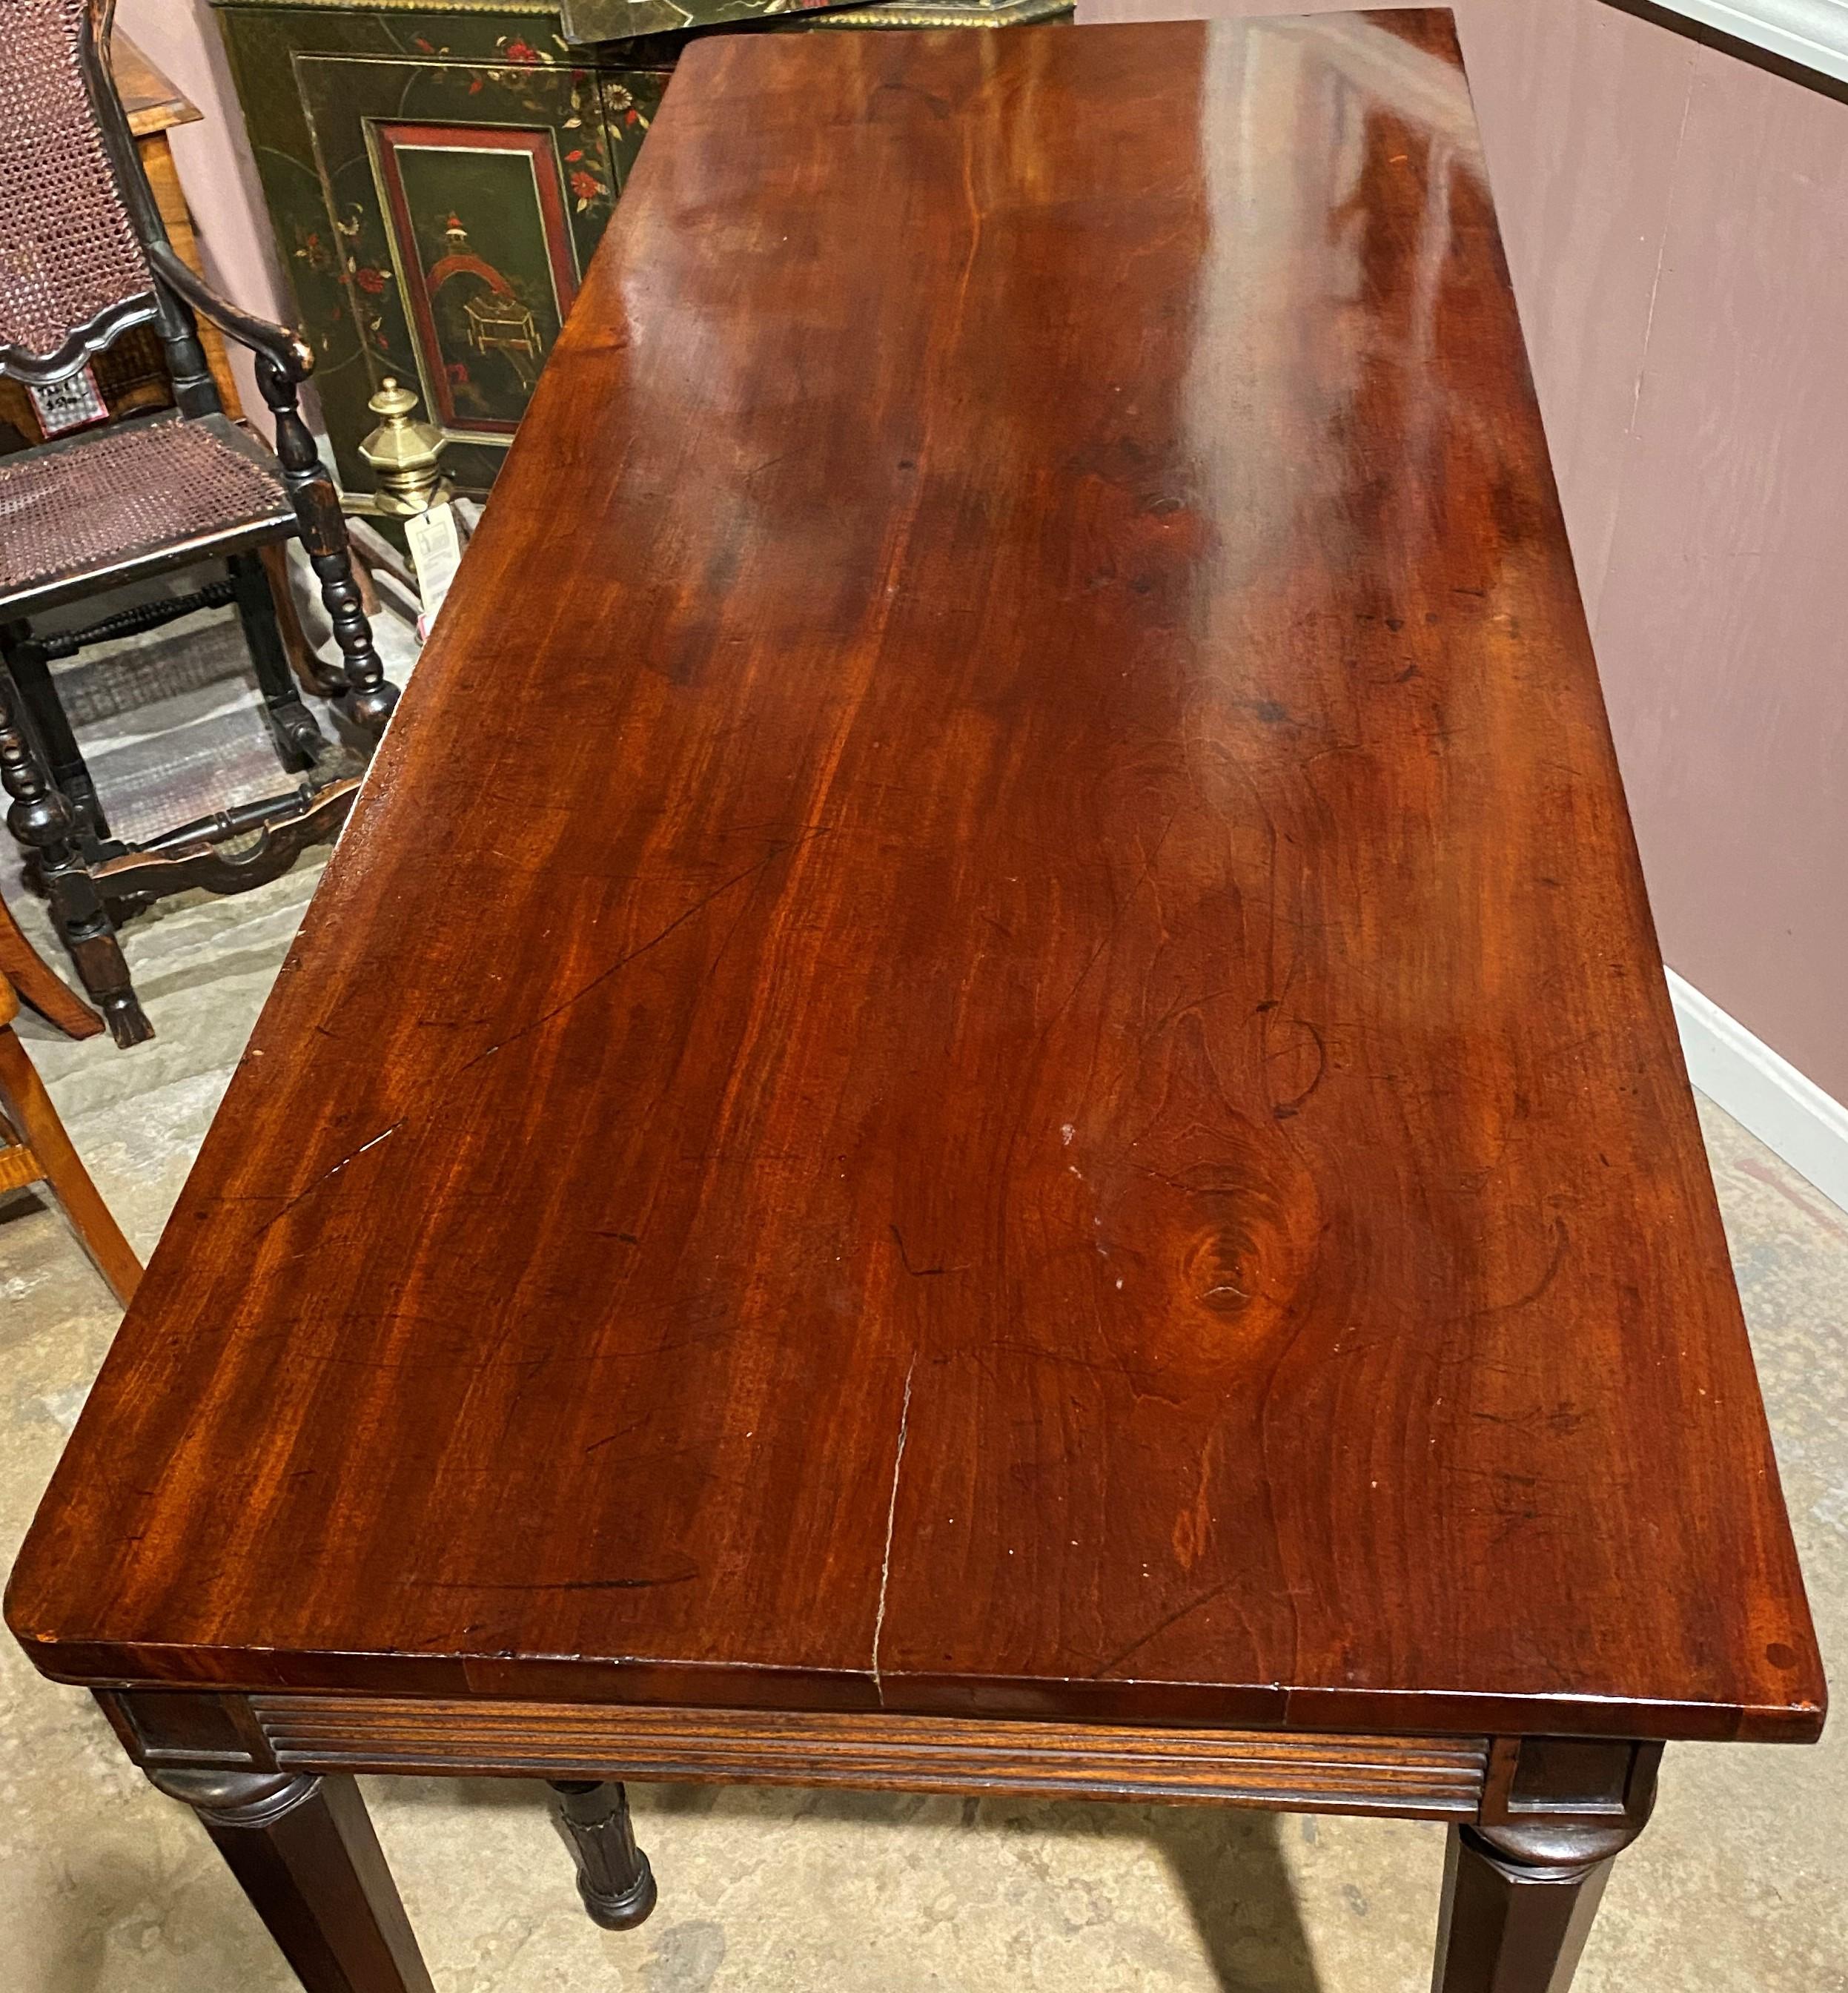 An elegant George III mahogany rectangular serving table in the Adam Style, with horizontal reeded frieze and supported by six round straight legs, tapered with panels, terminating with acanthus decorated feet. Dates to the late 18th or early 19th